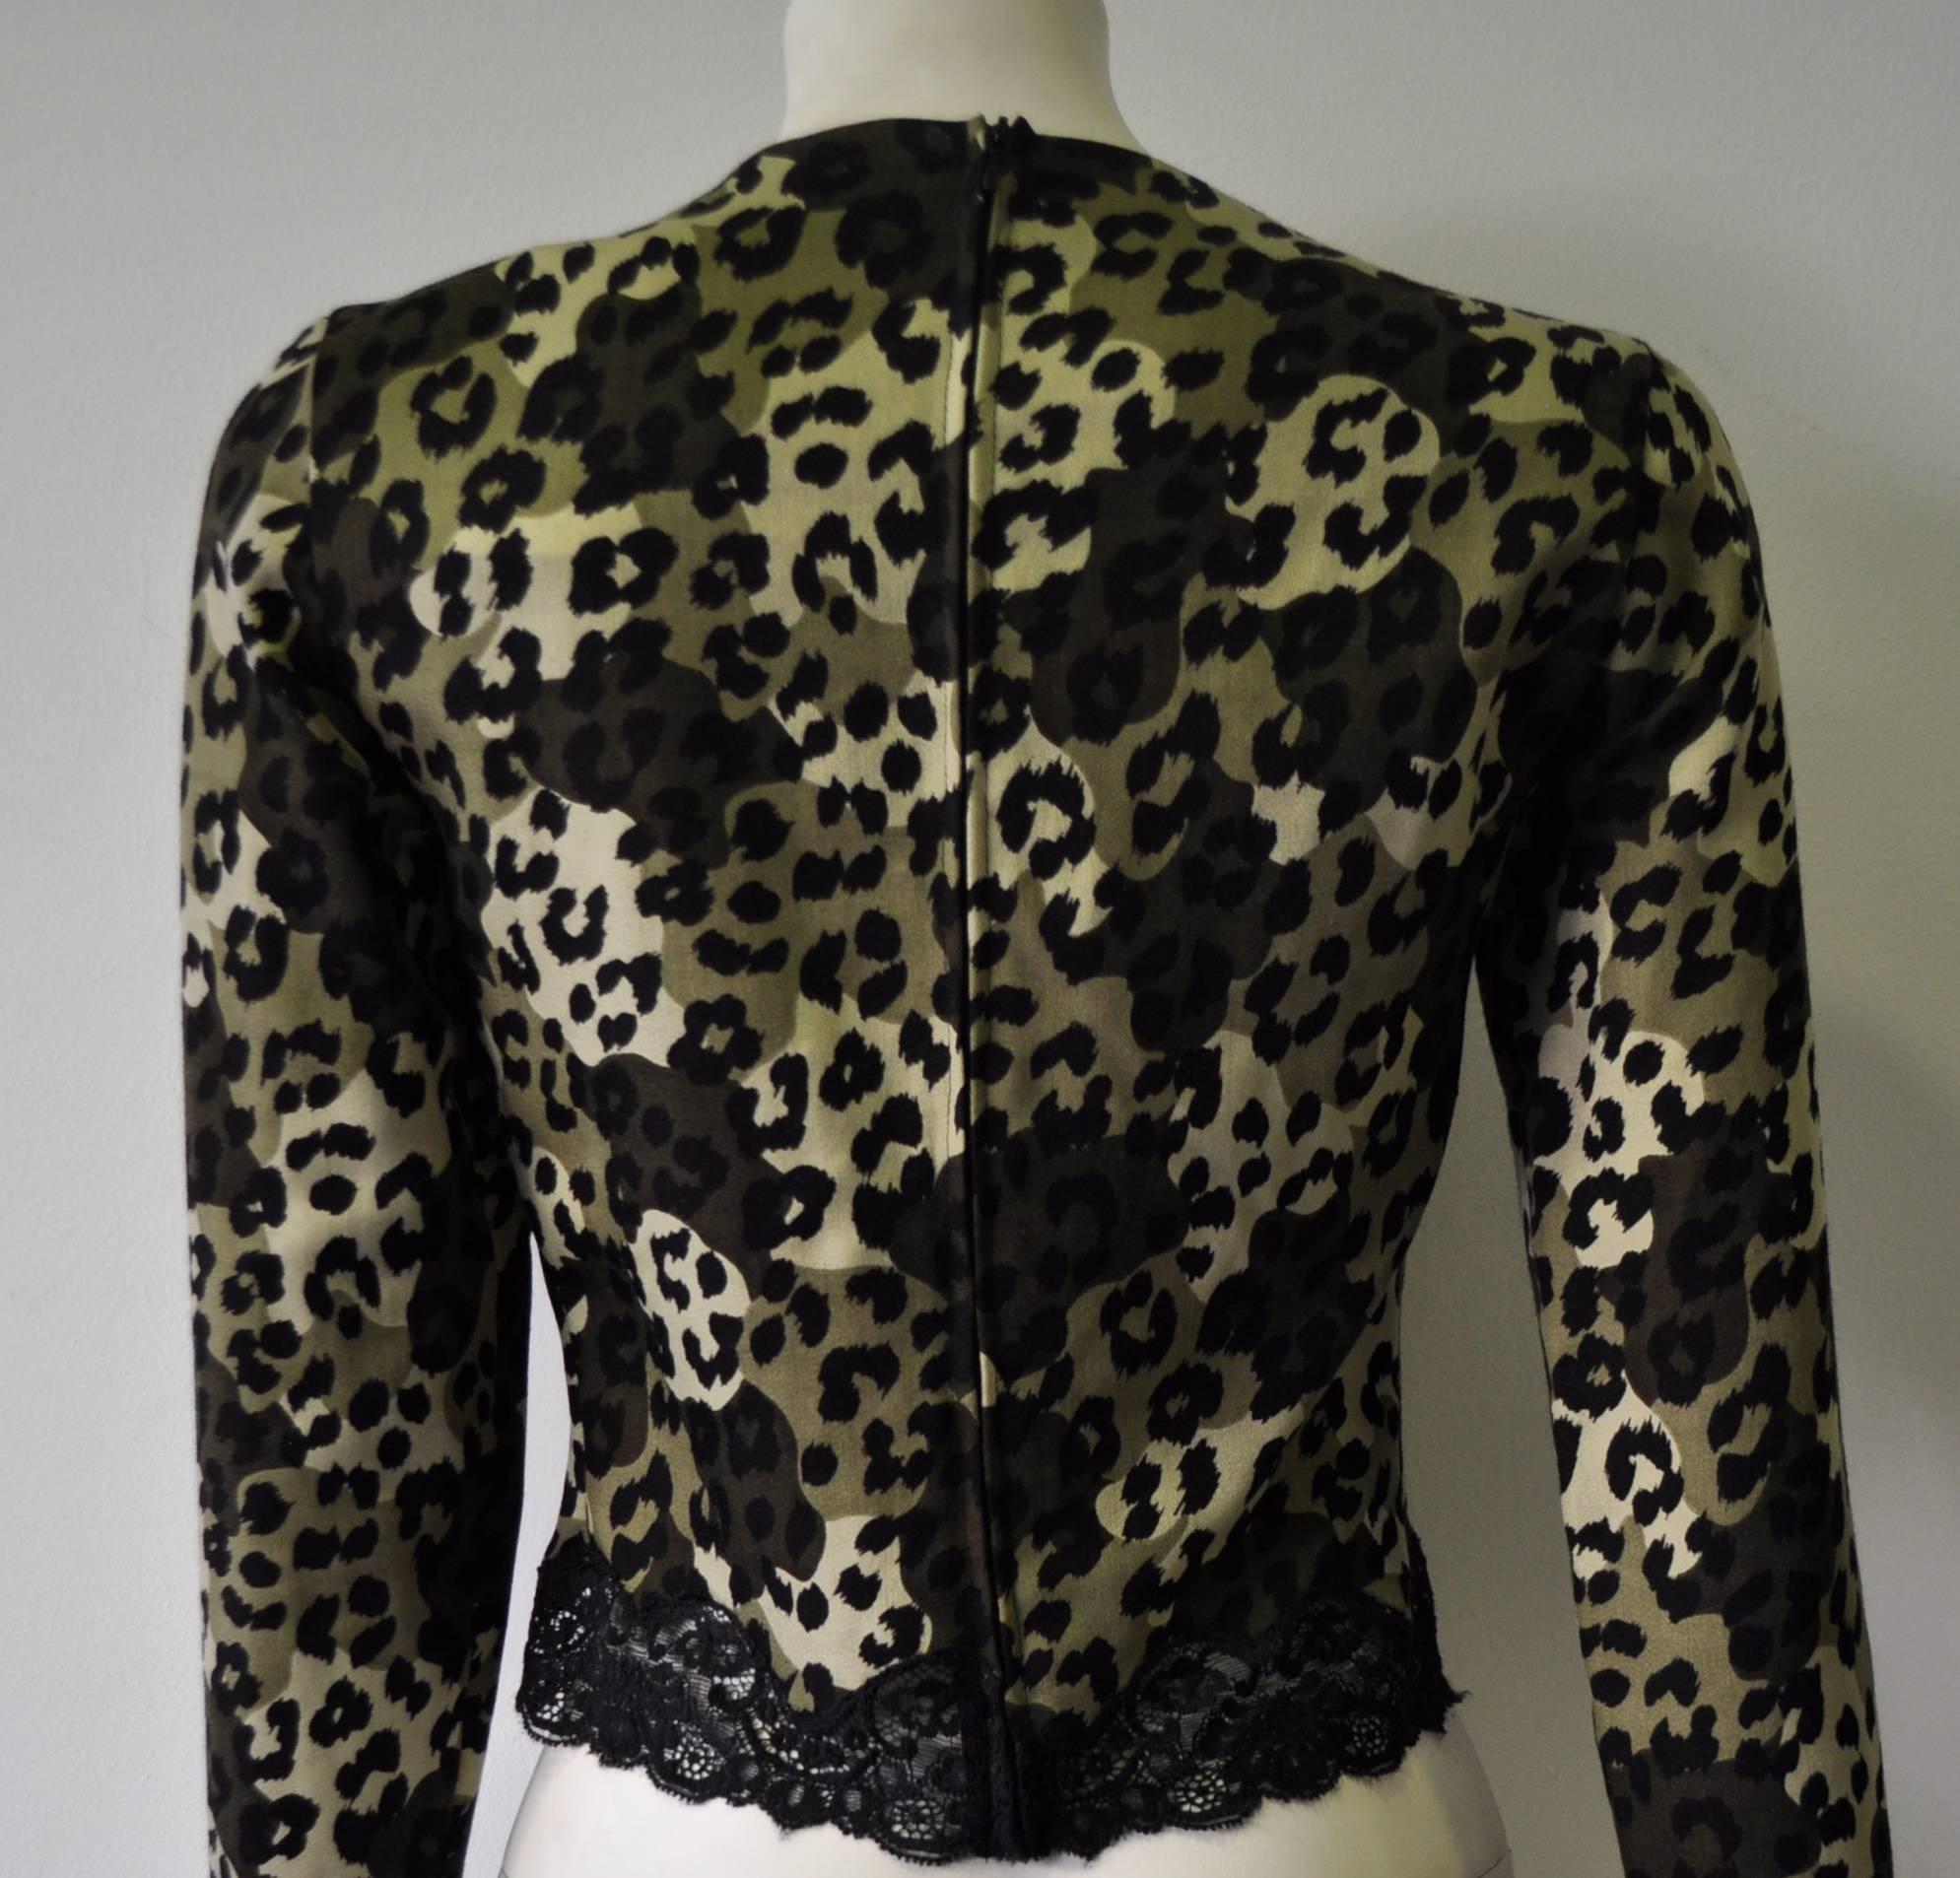 Rare and interesting Gianni Versace 100% Wool Leopard Camouflage Printed Top with lace trim and refined zipper sleeve detail.